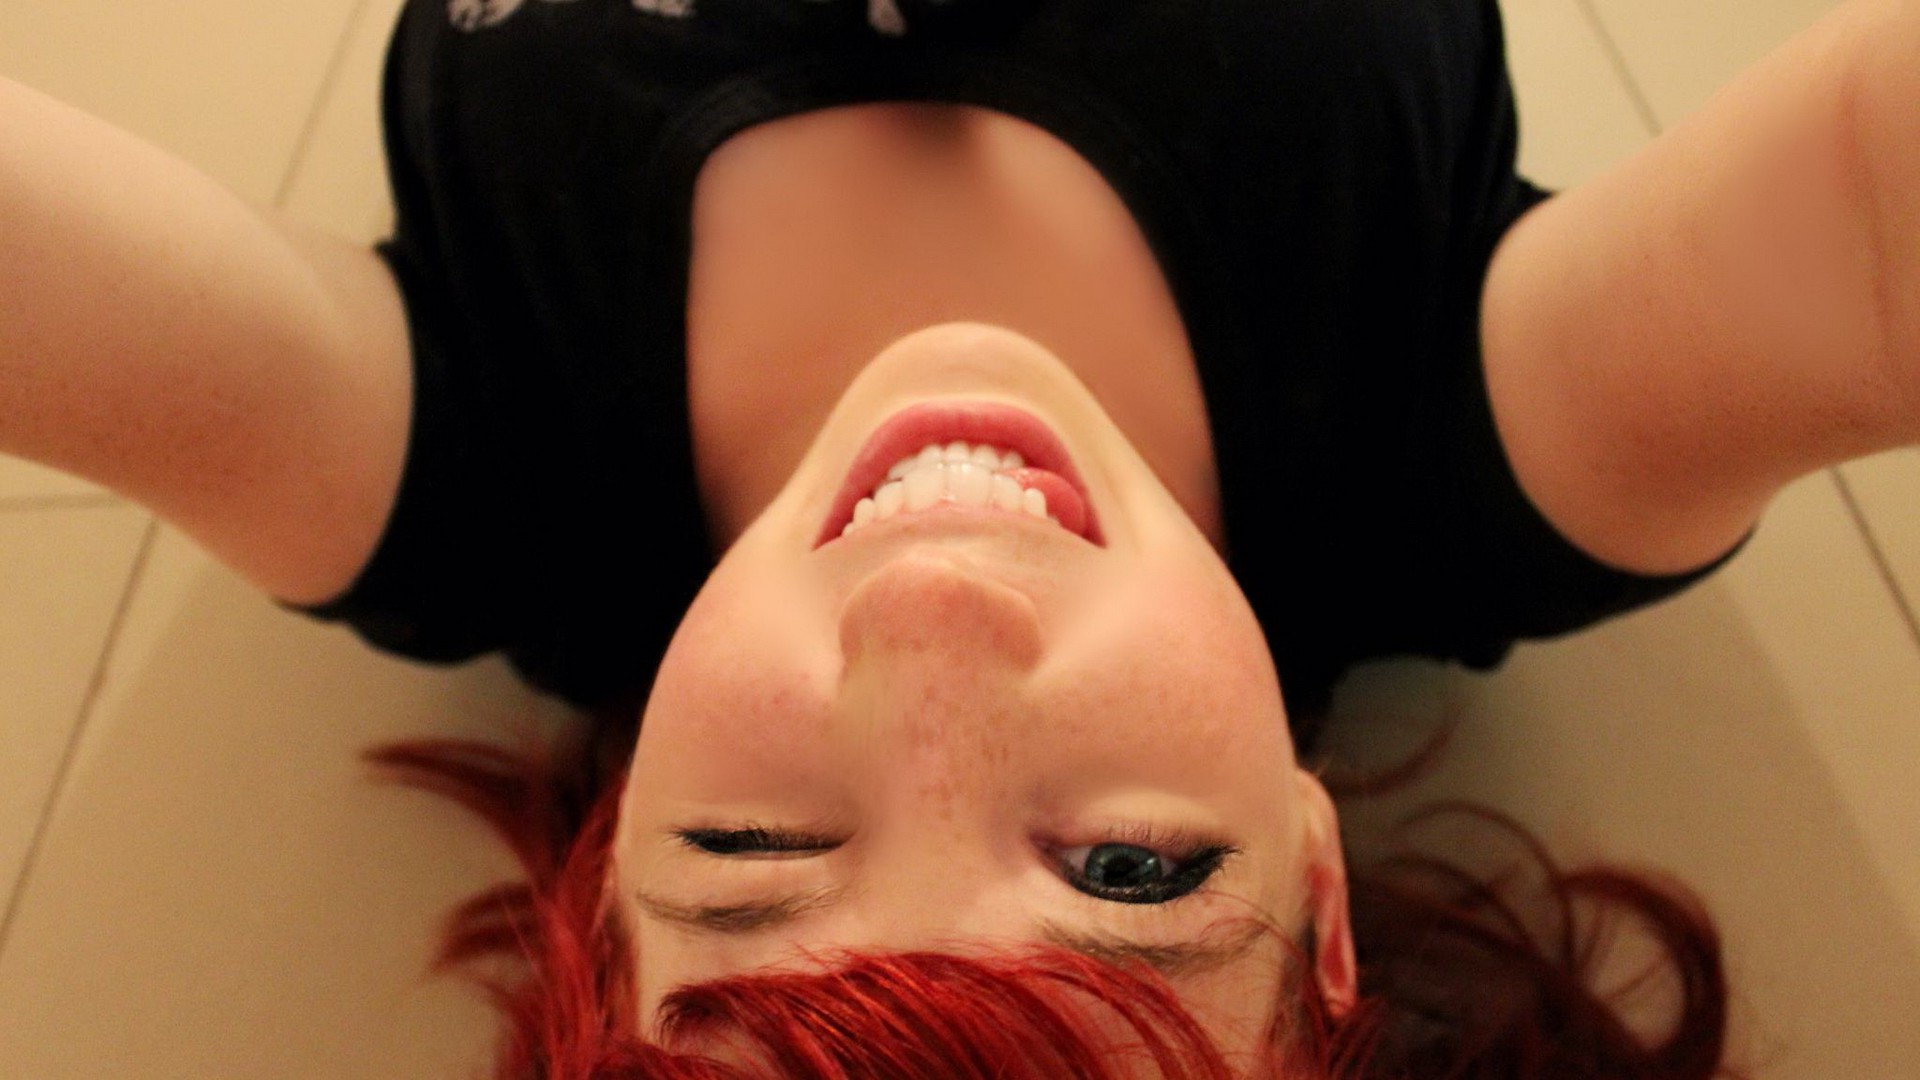 redhead, Lying Down, Dyed Hair, Freckles, Blue Eyes, Tongues, Black